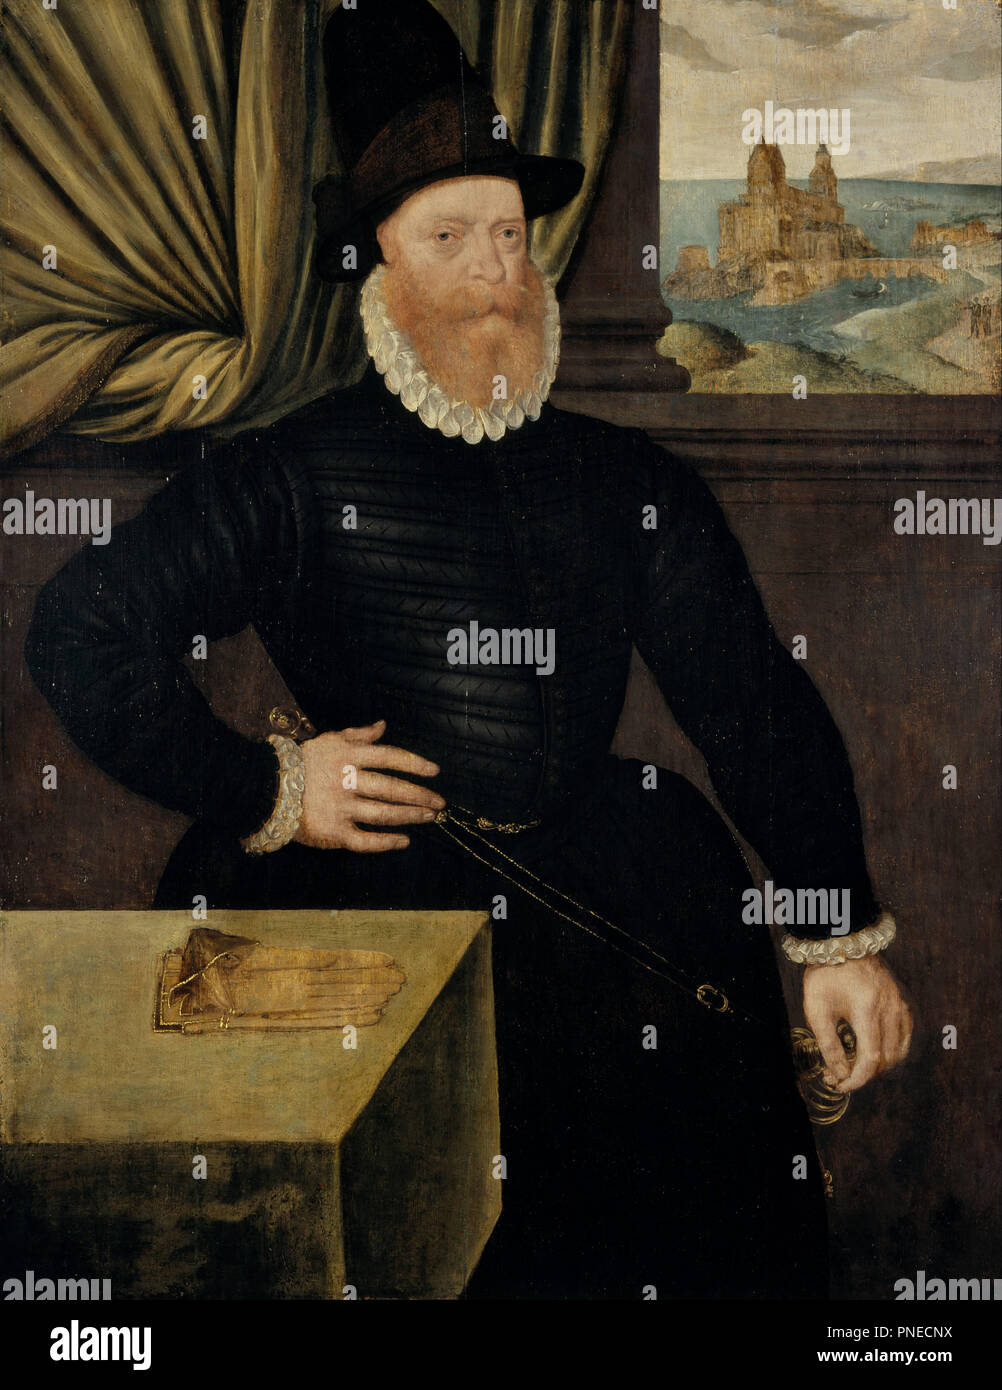 James Douglas, 4th Earl of Morton, about 1516 - 1581. Regent of Scotland. Date/Period: 1580. Painting. Oil on panel. Height: 1,063 mm (41.85 in); Width: 821 mm (32.32 in). Author: Attributed to Arnold Bronckorst. Stock Photo